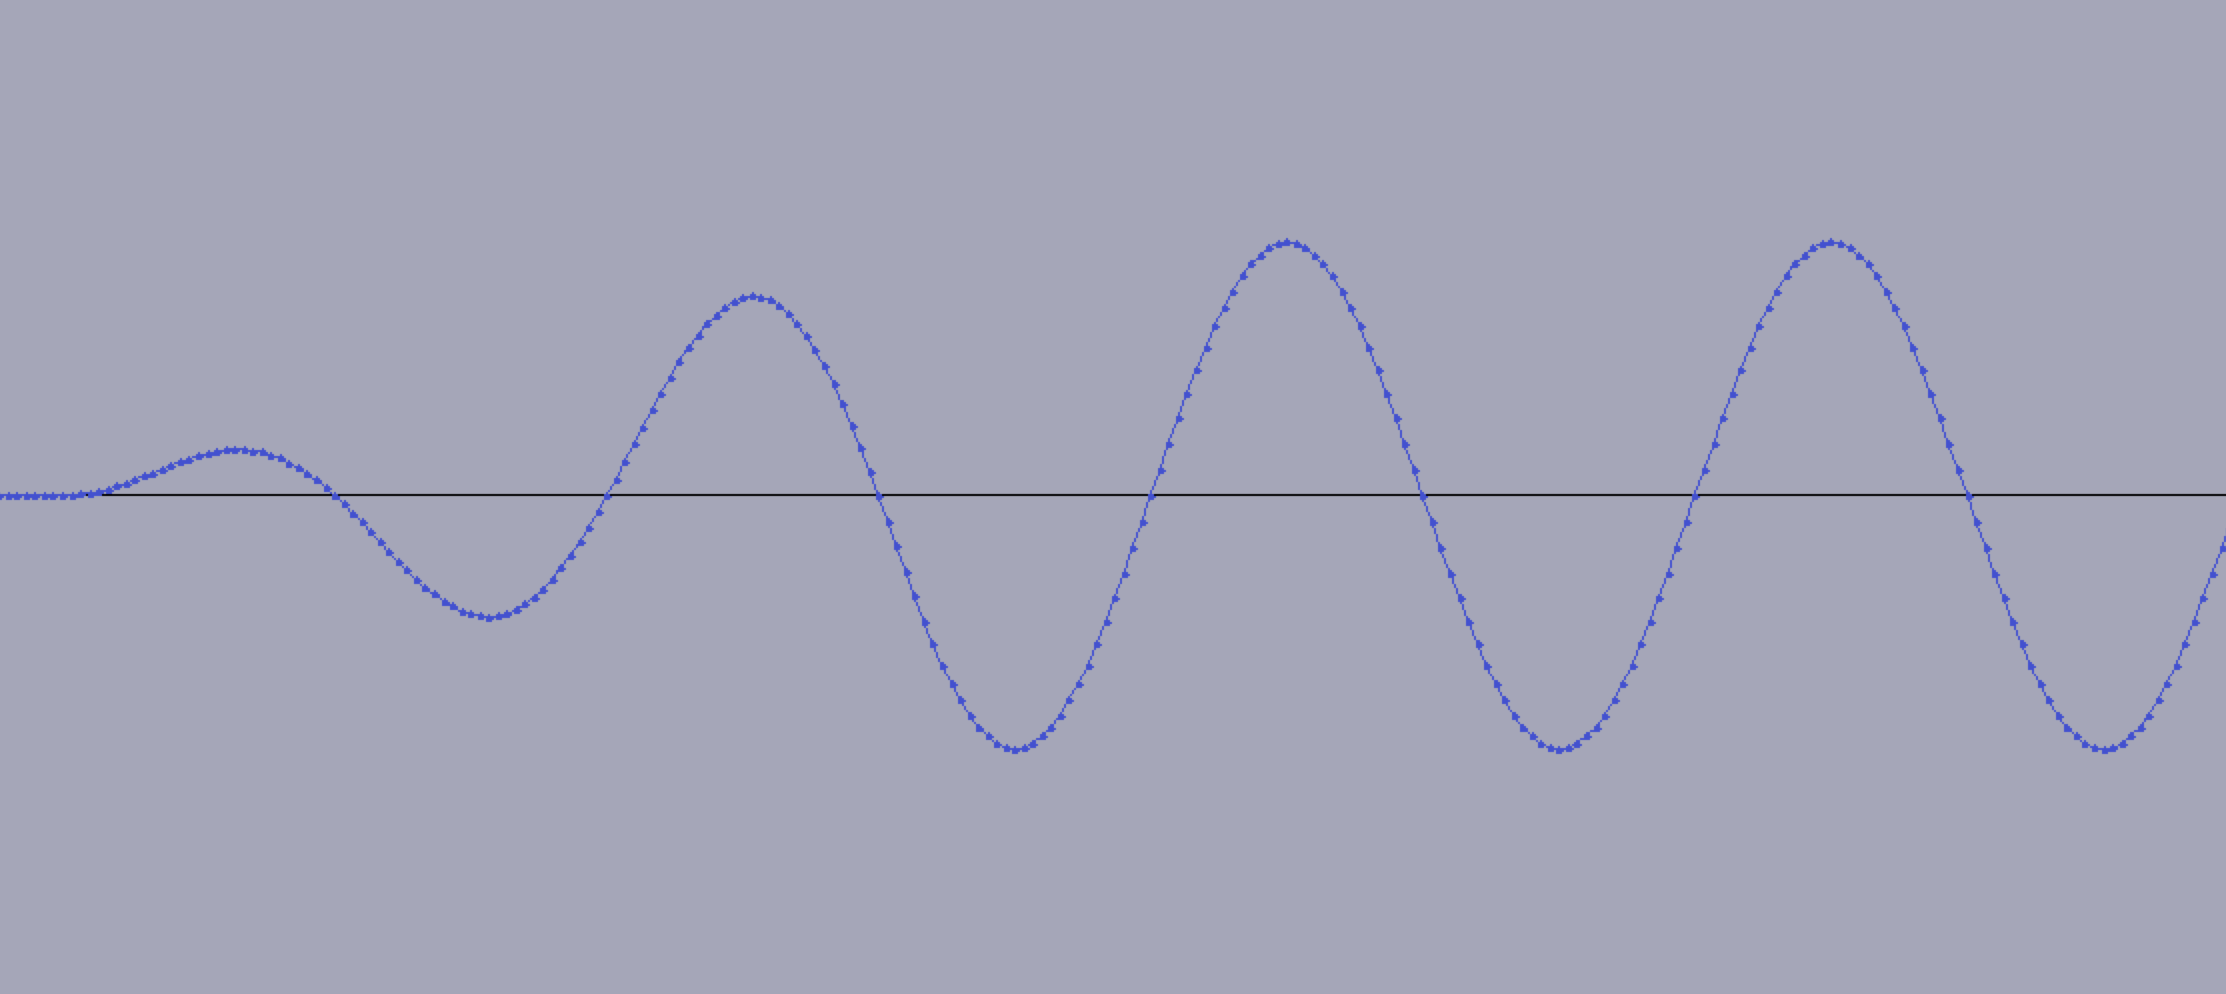 Figure 2: Sinusoidal wave with fade-in